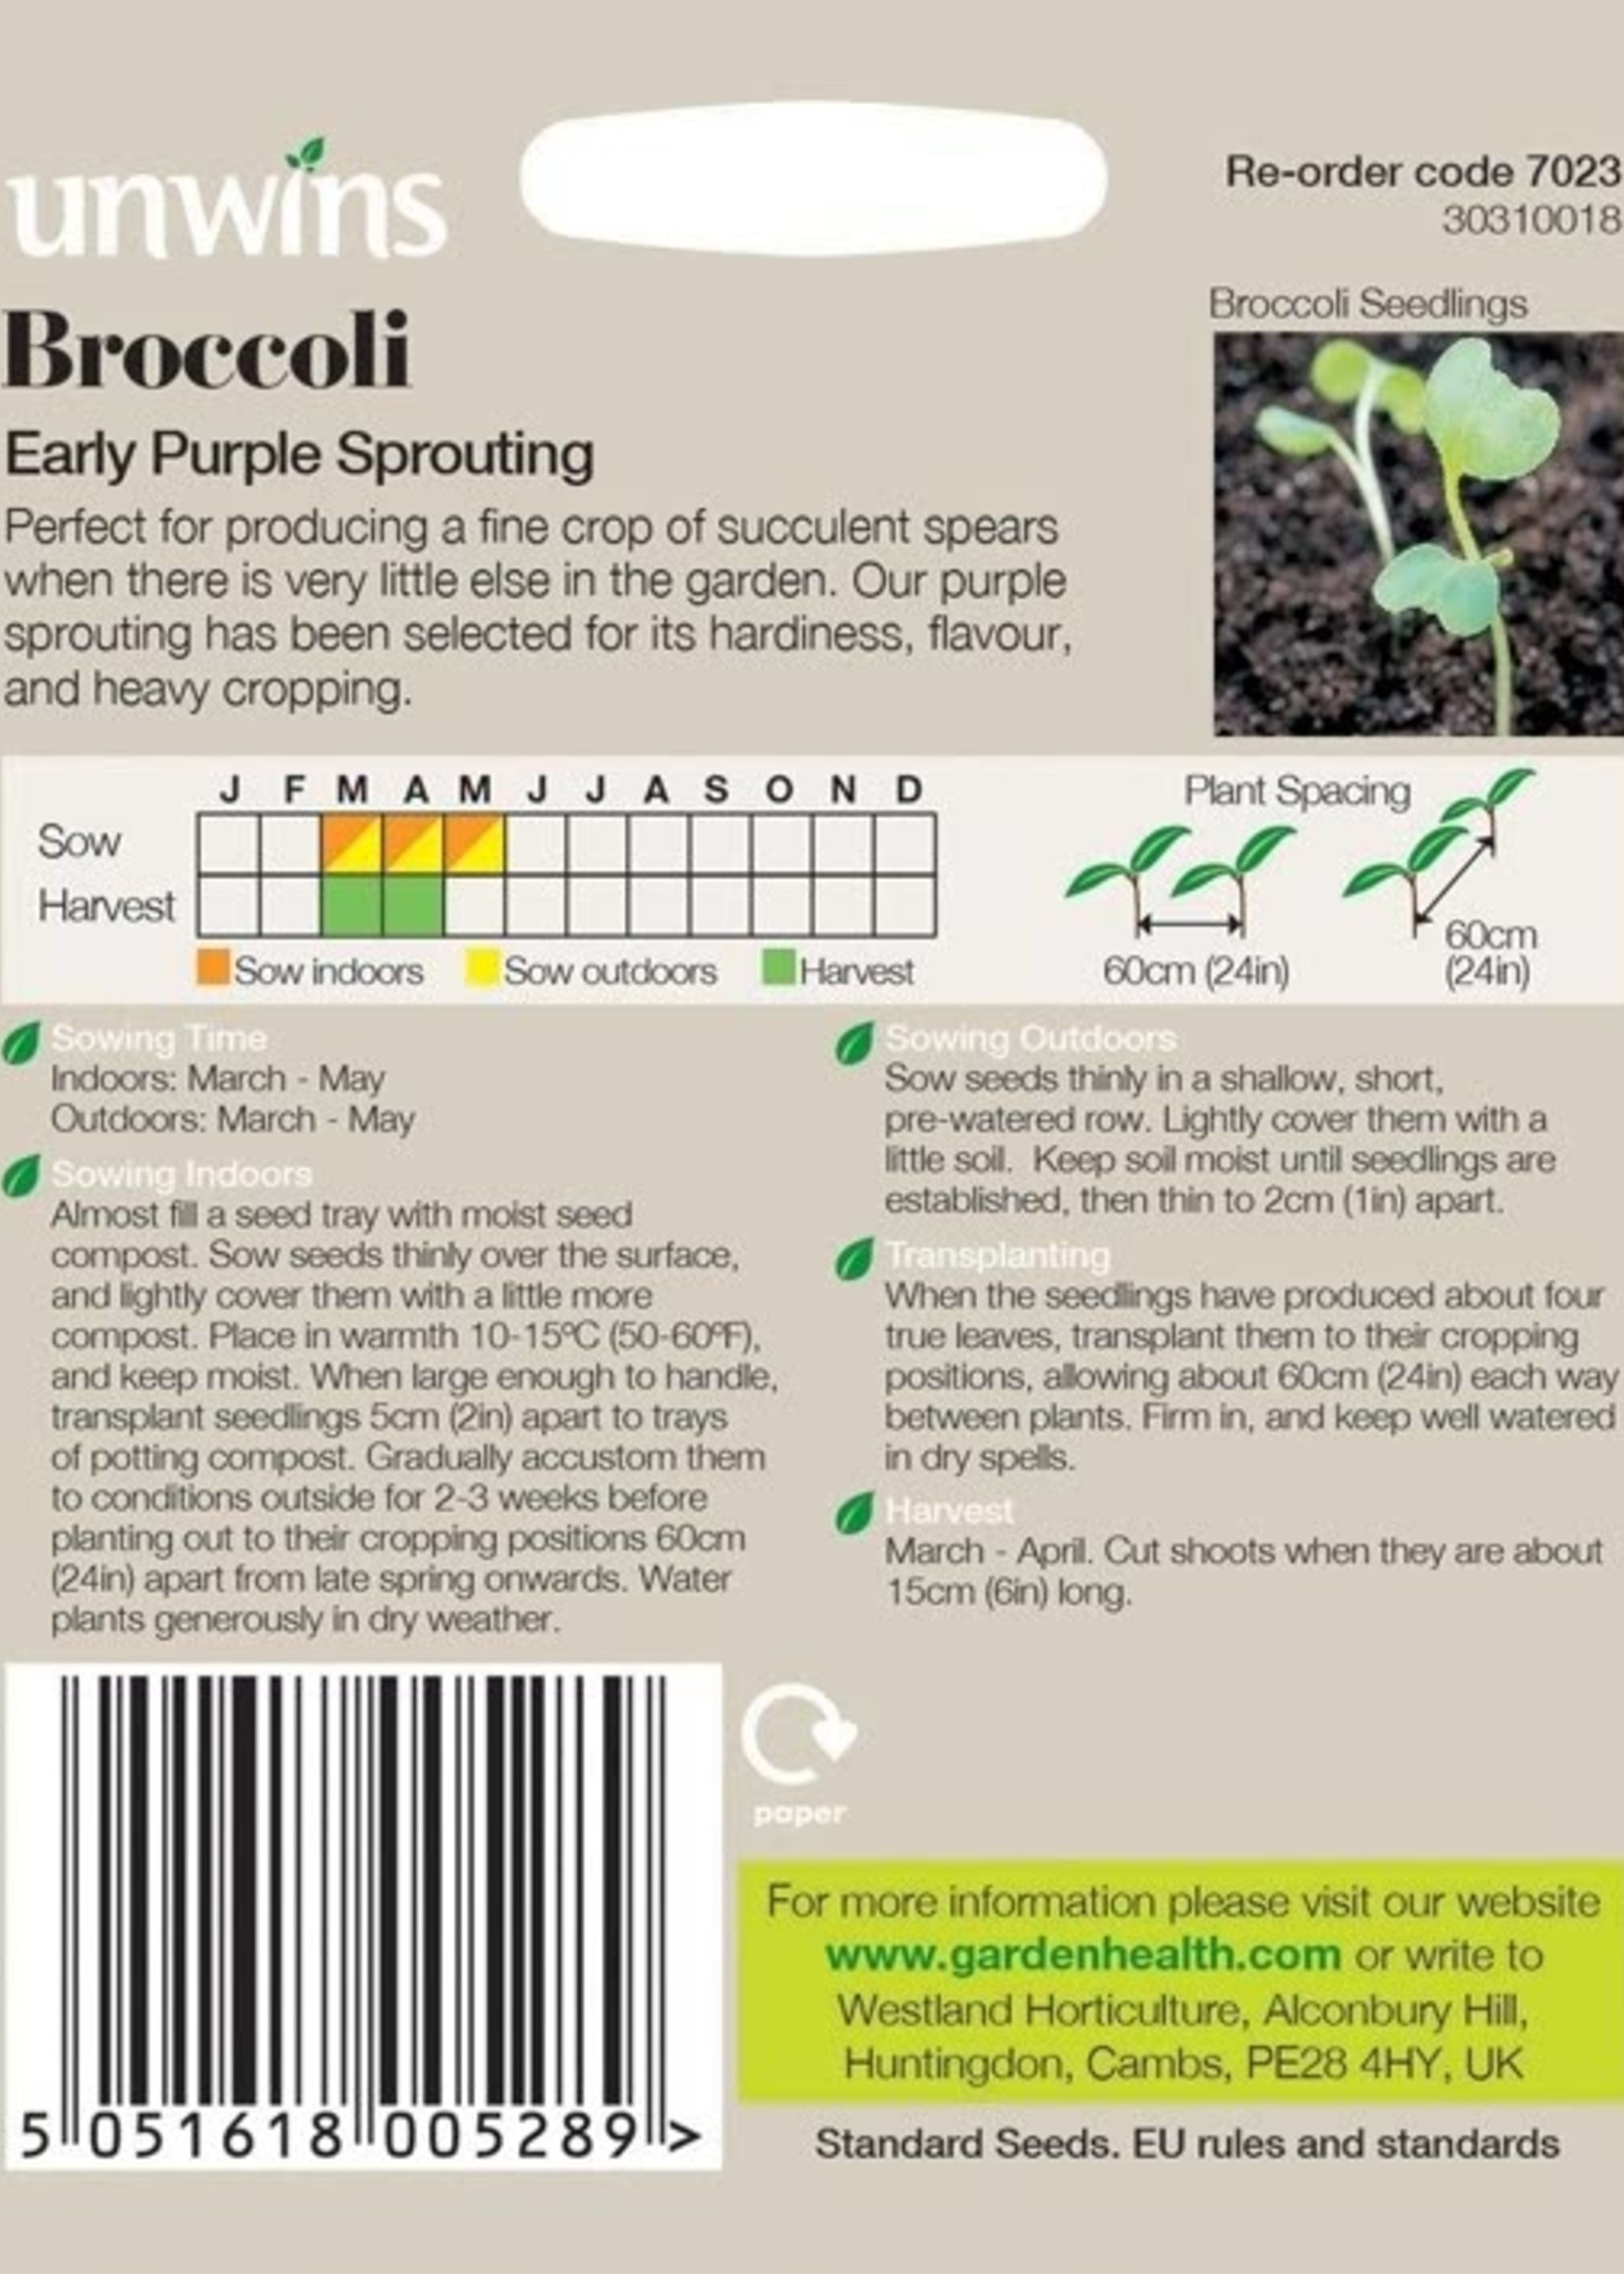 Unwins Broccoli - Early Purple Sprouting